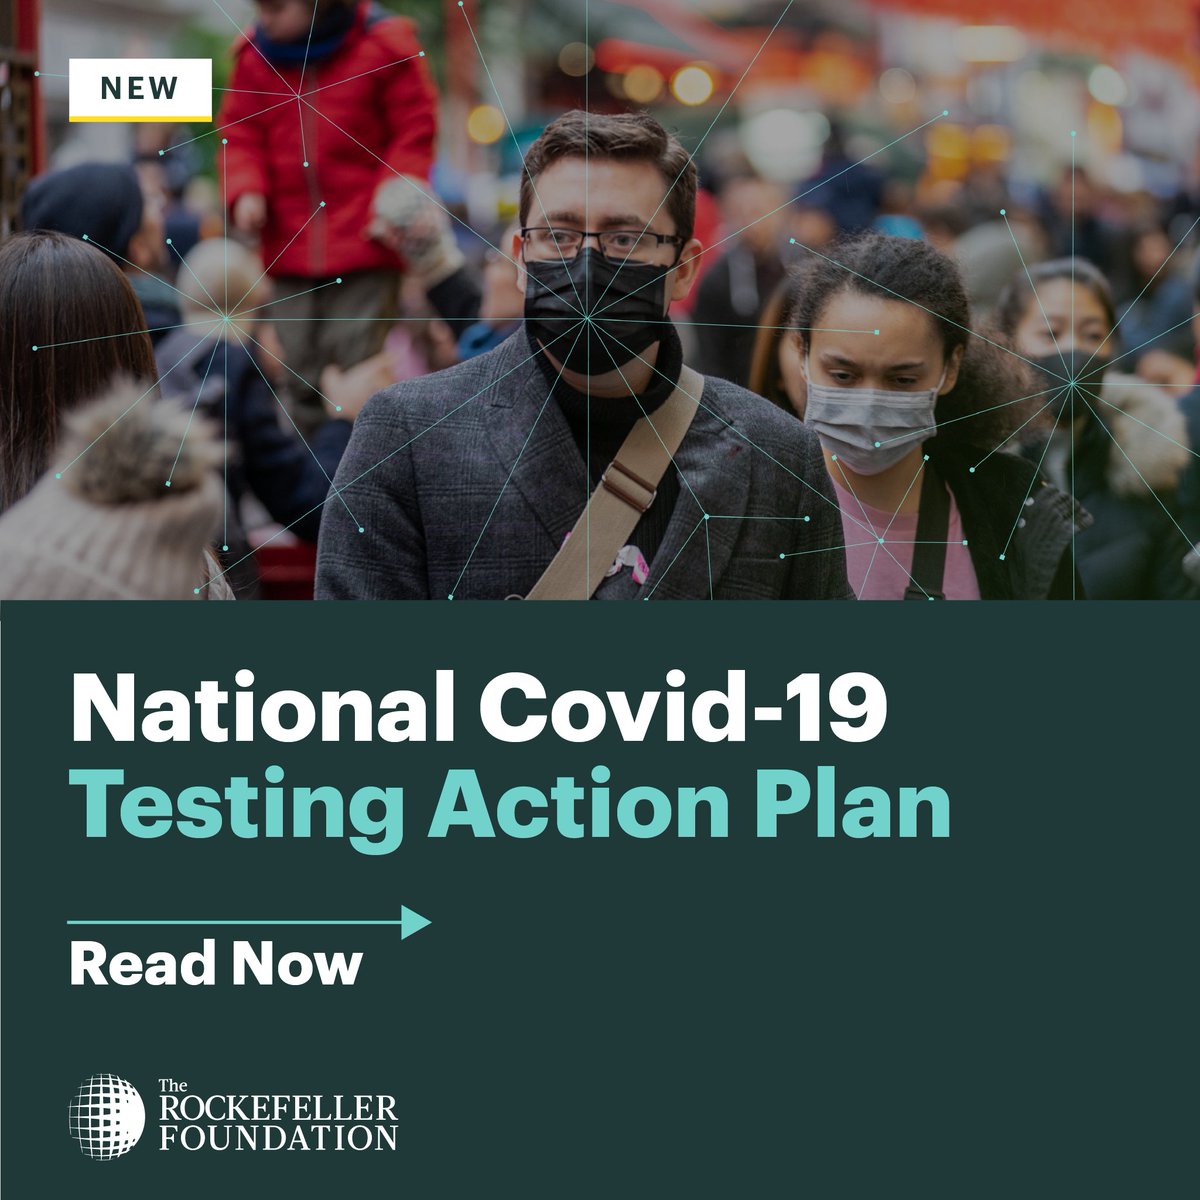 Embargoed until 12:01am EDT, Tuesday, April 21, 2020: The  #Rockefeller Foundation has created a National  #Covid19 Testing Action Plan intended to serve as a resource guide for the "largest public health testing program in American history".